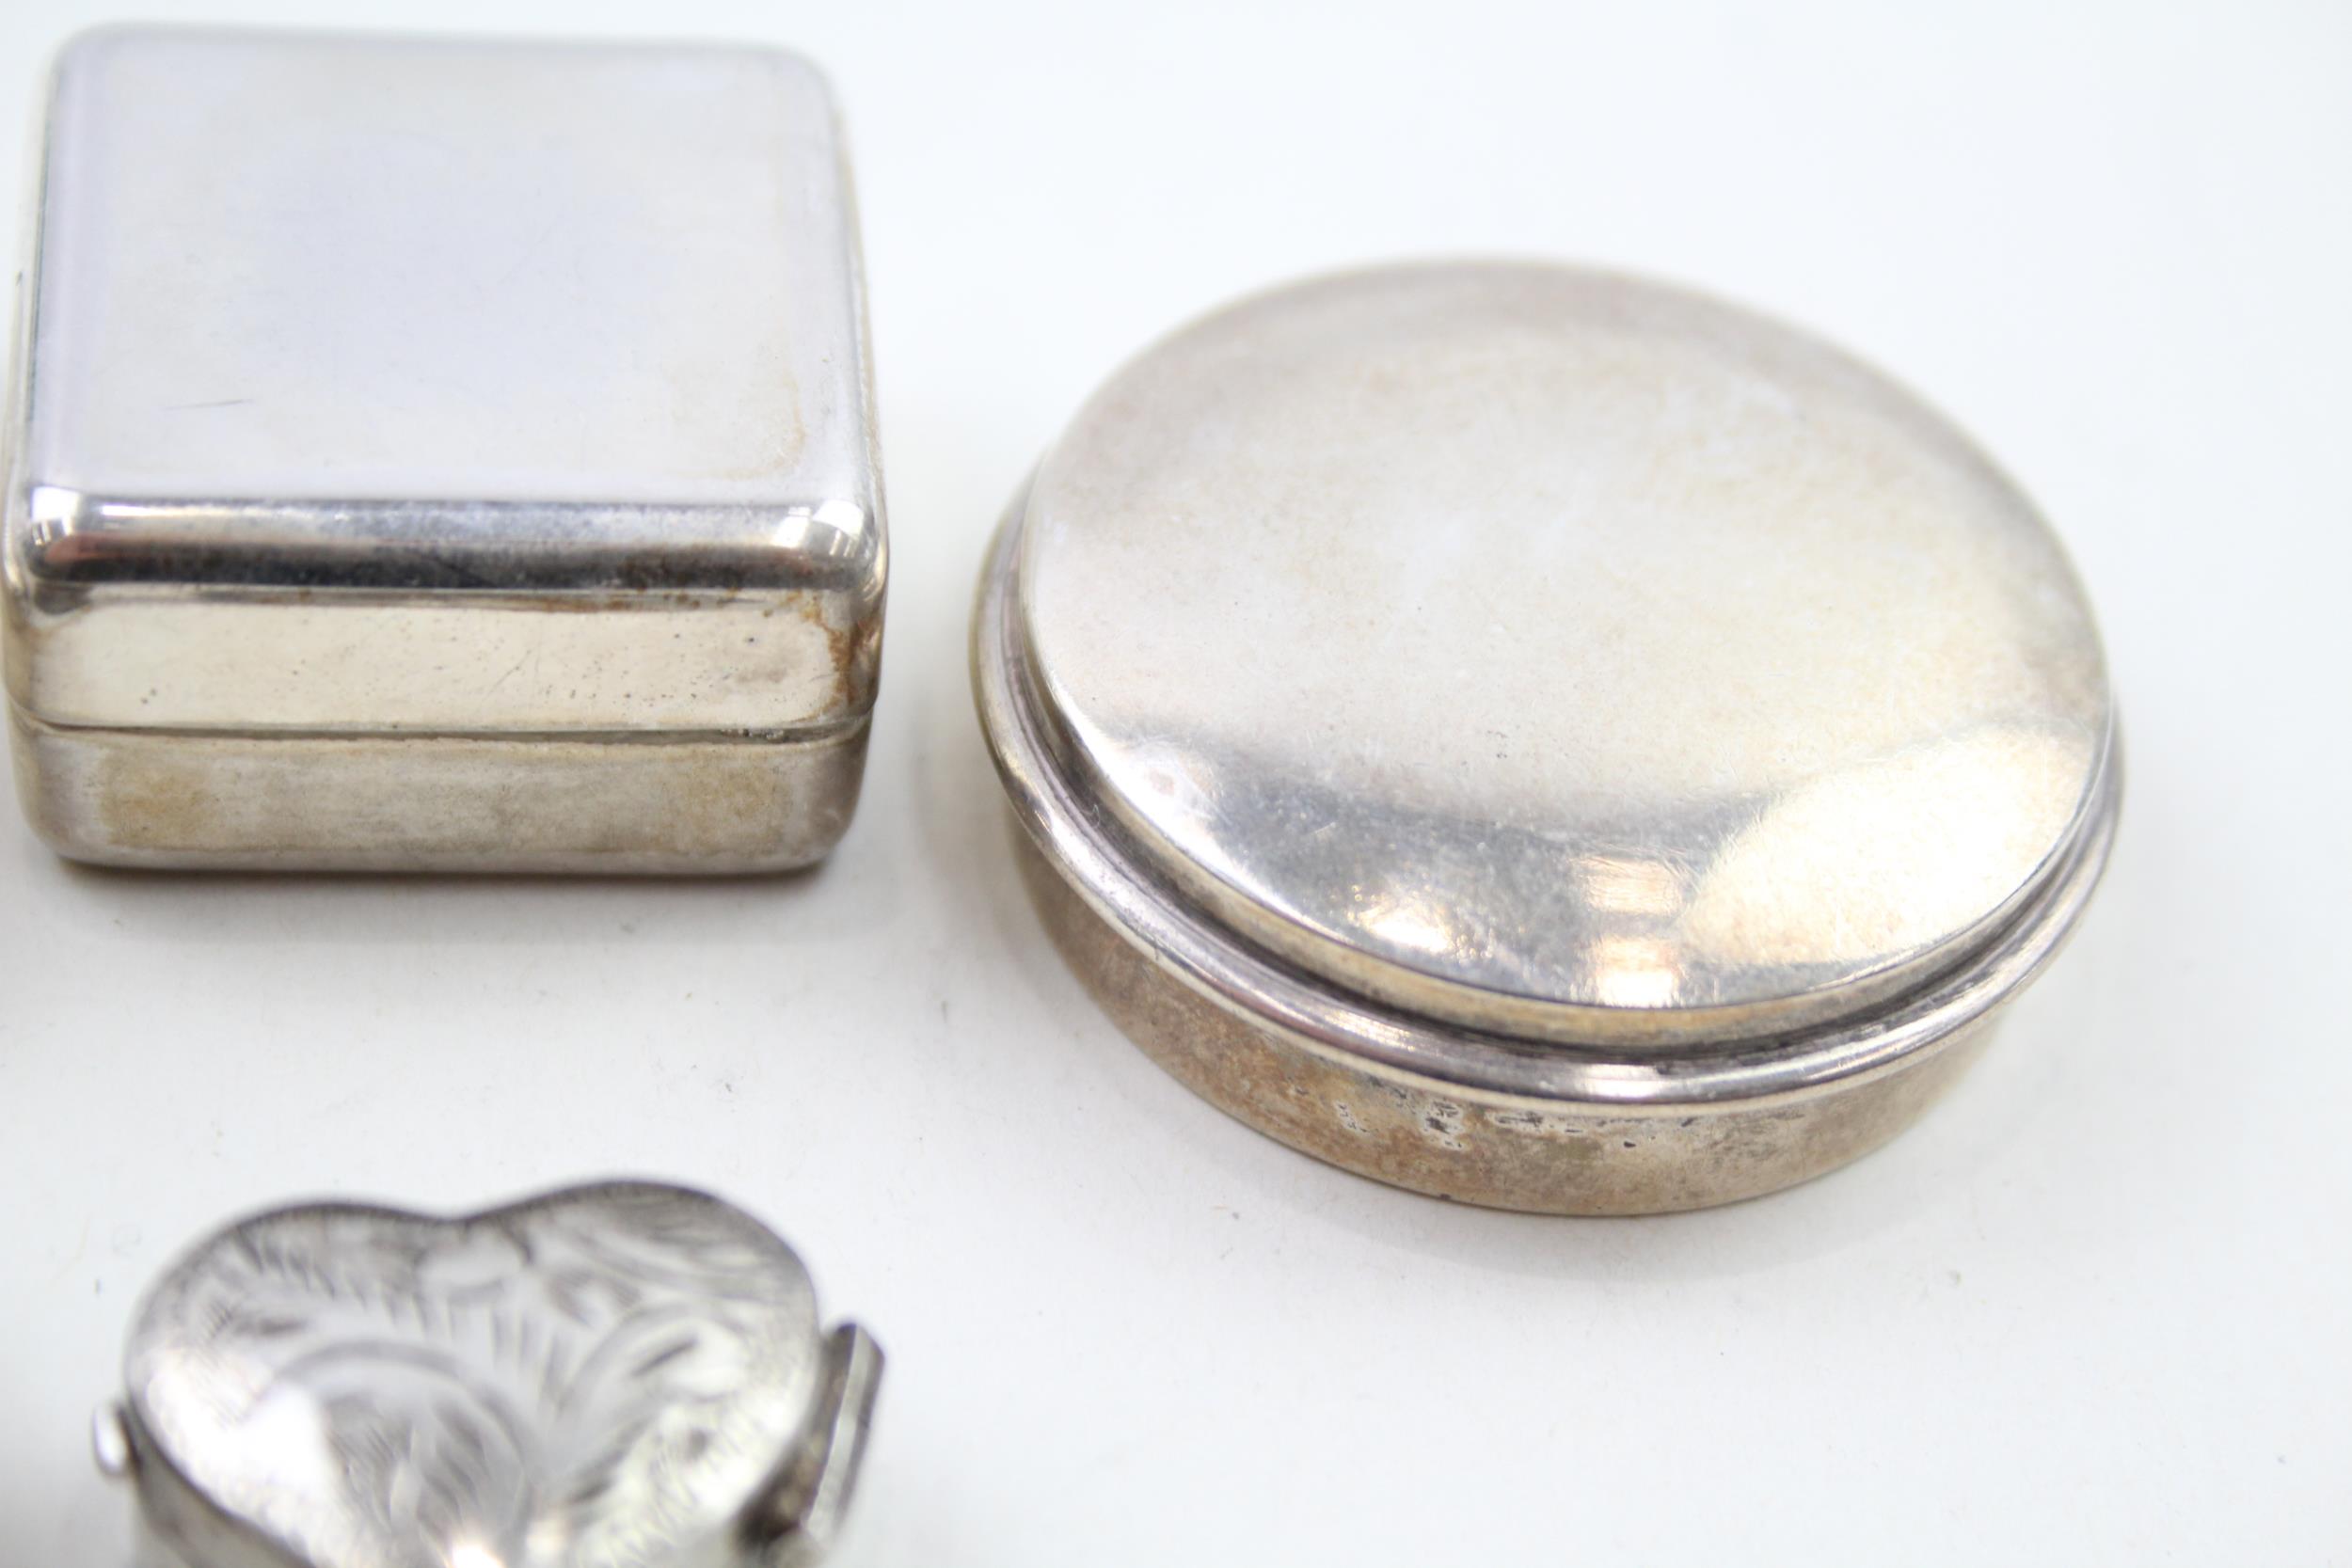 5 x Antique / Vintage Hallmarked .925 STERLING SILVER Pill / Trinket Boxes (90g) - In antique / - Image 5 of 5